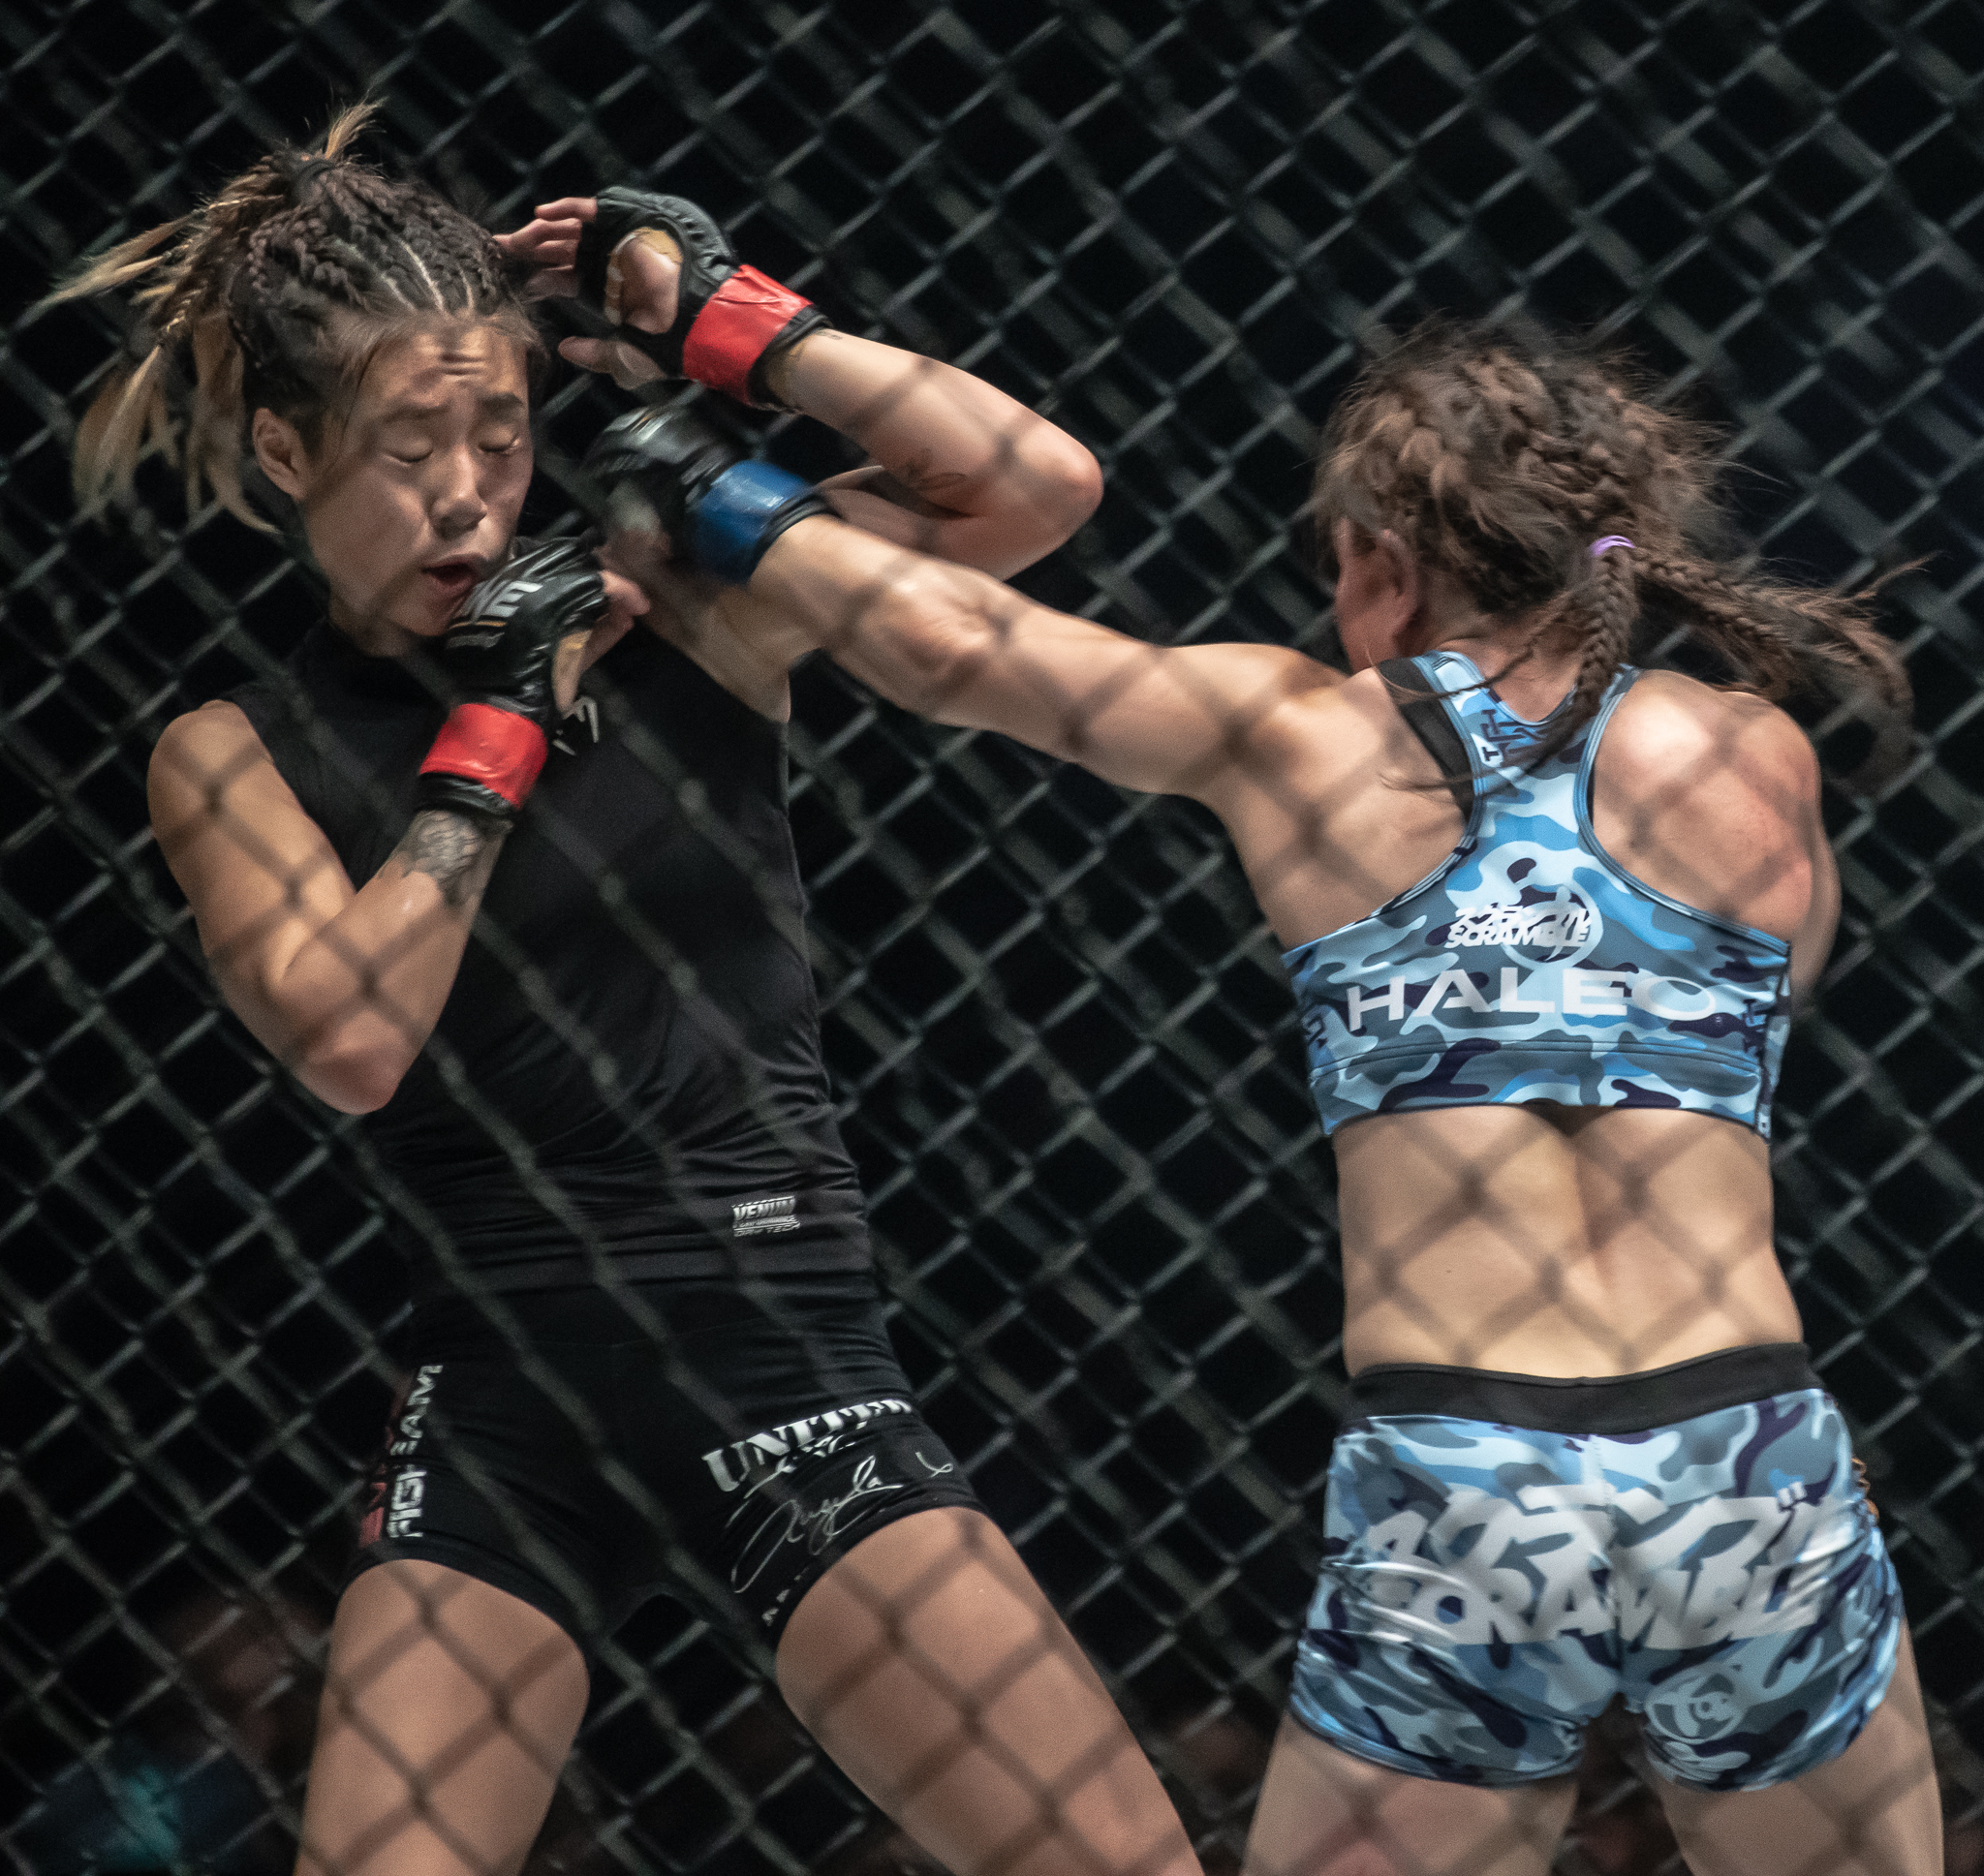 A Japanese MMA athlete punches her Singapore opponent during a One Championship World Title match at the Singapore Indoor Stadium.